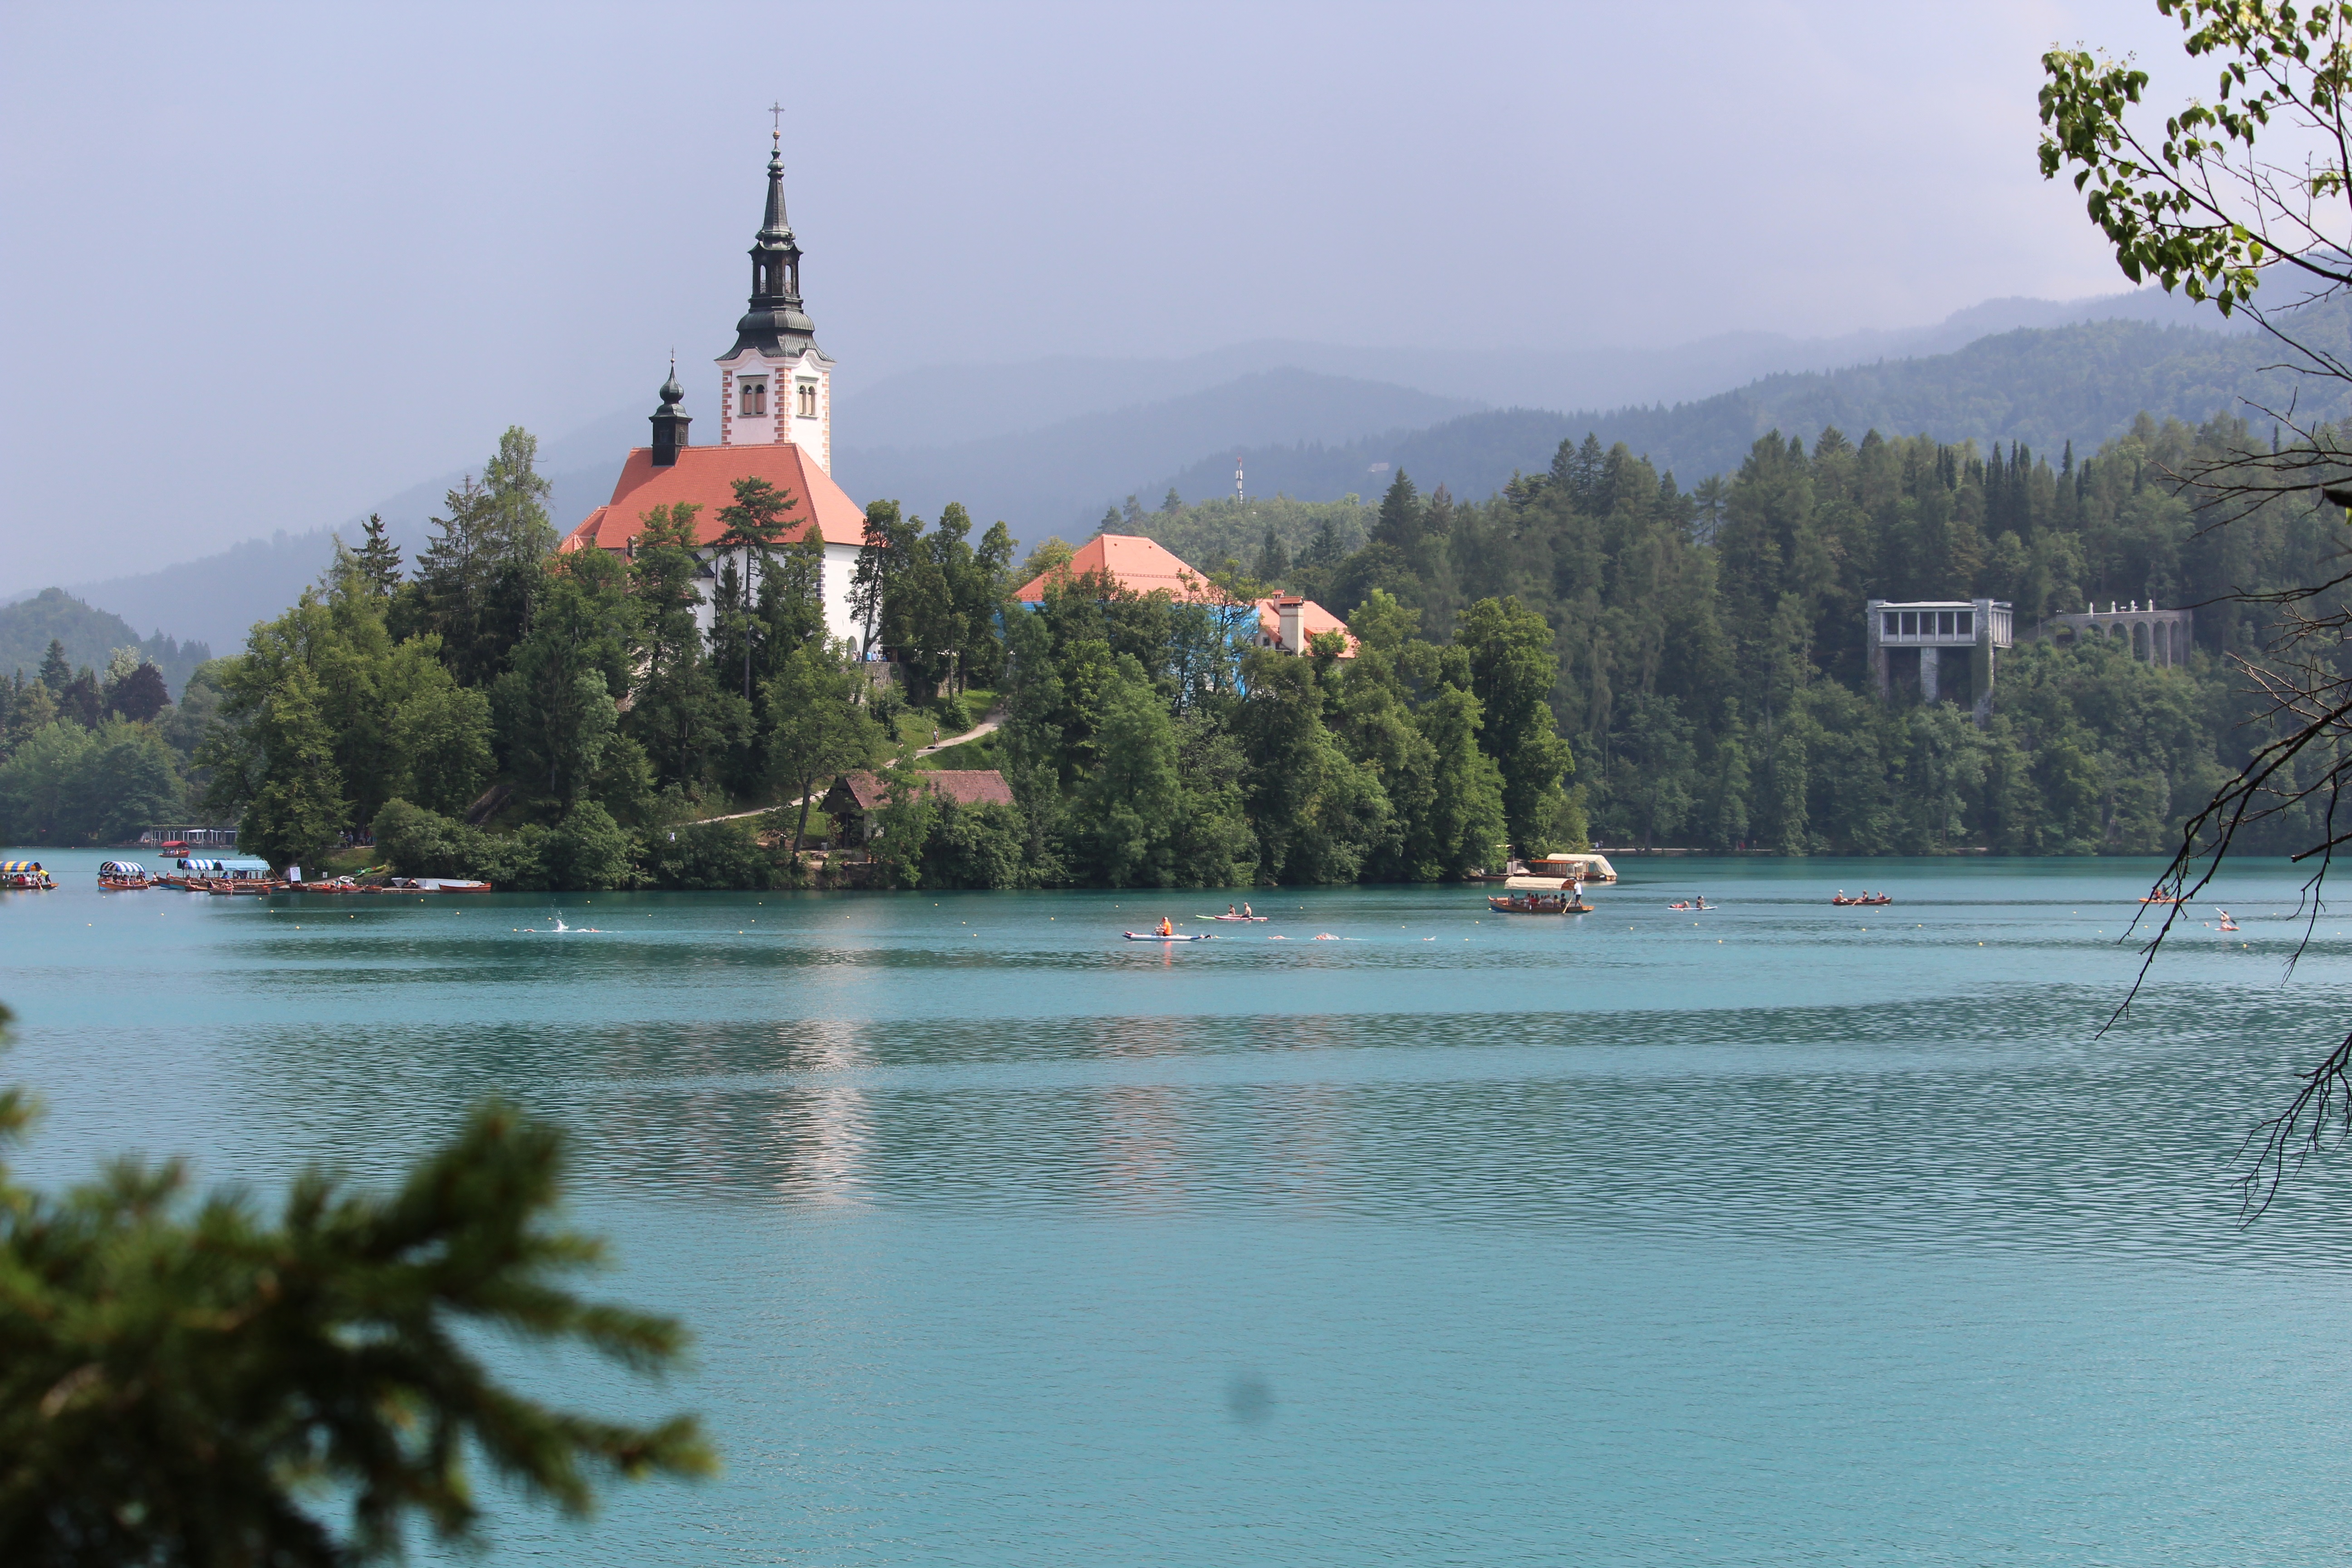 View of the lake with the island and church